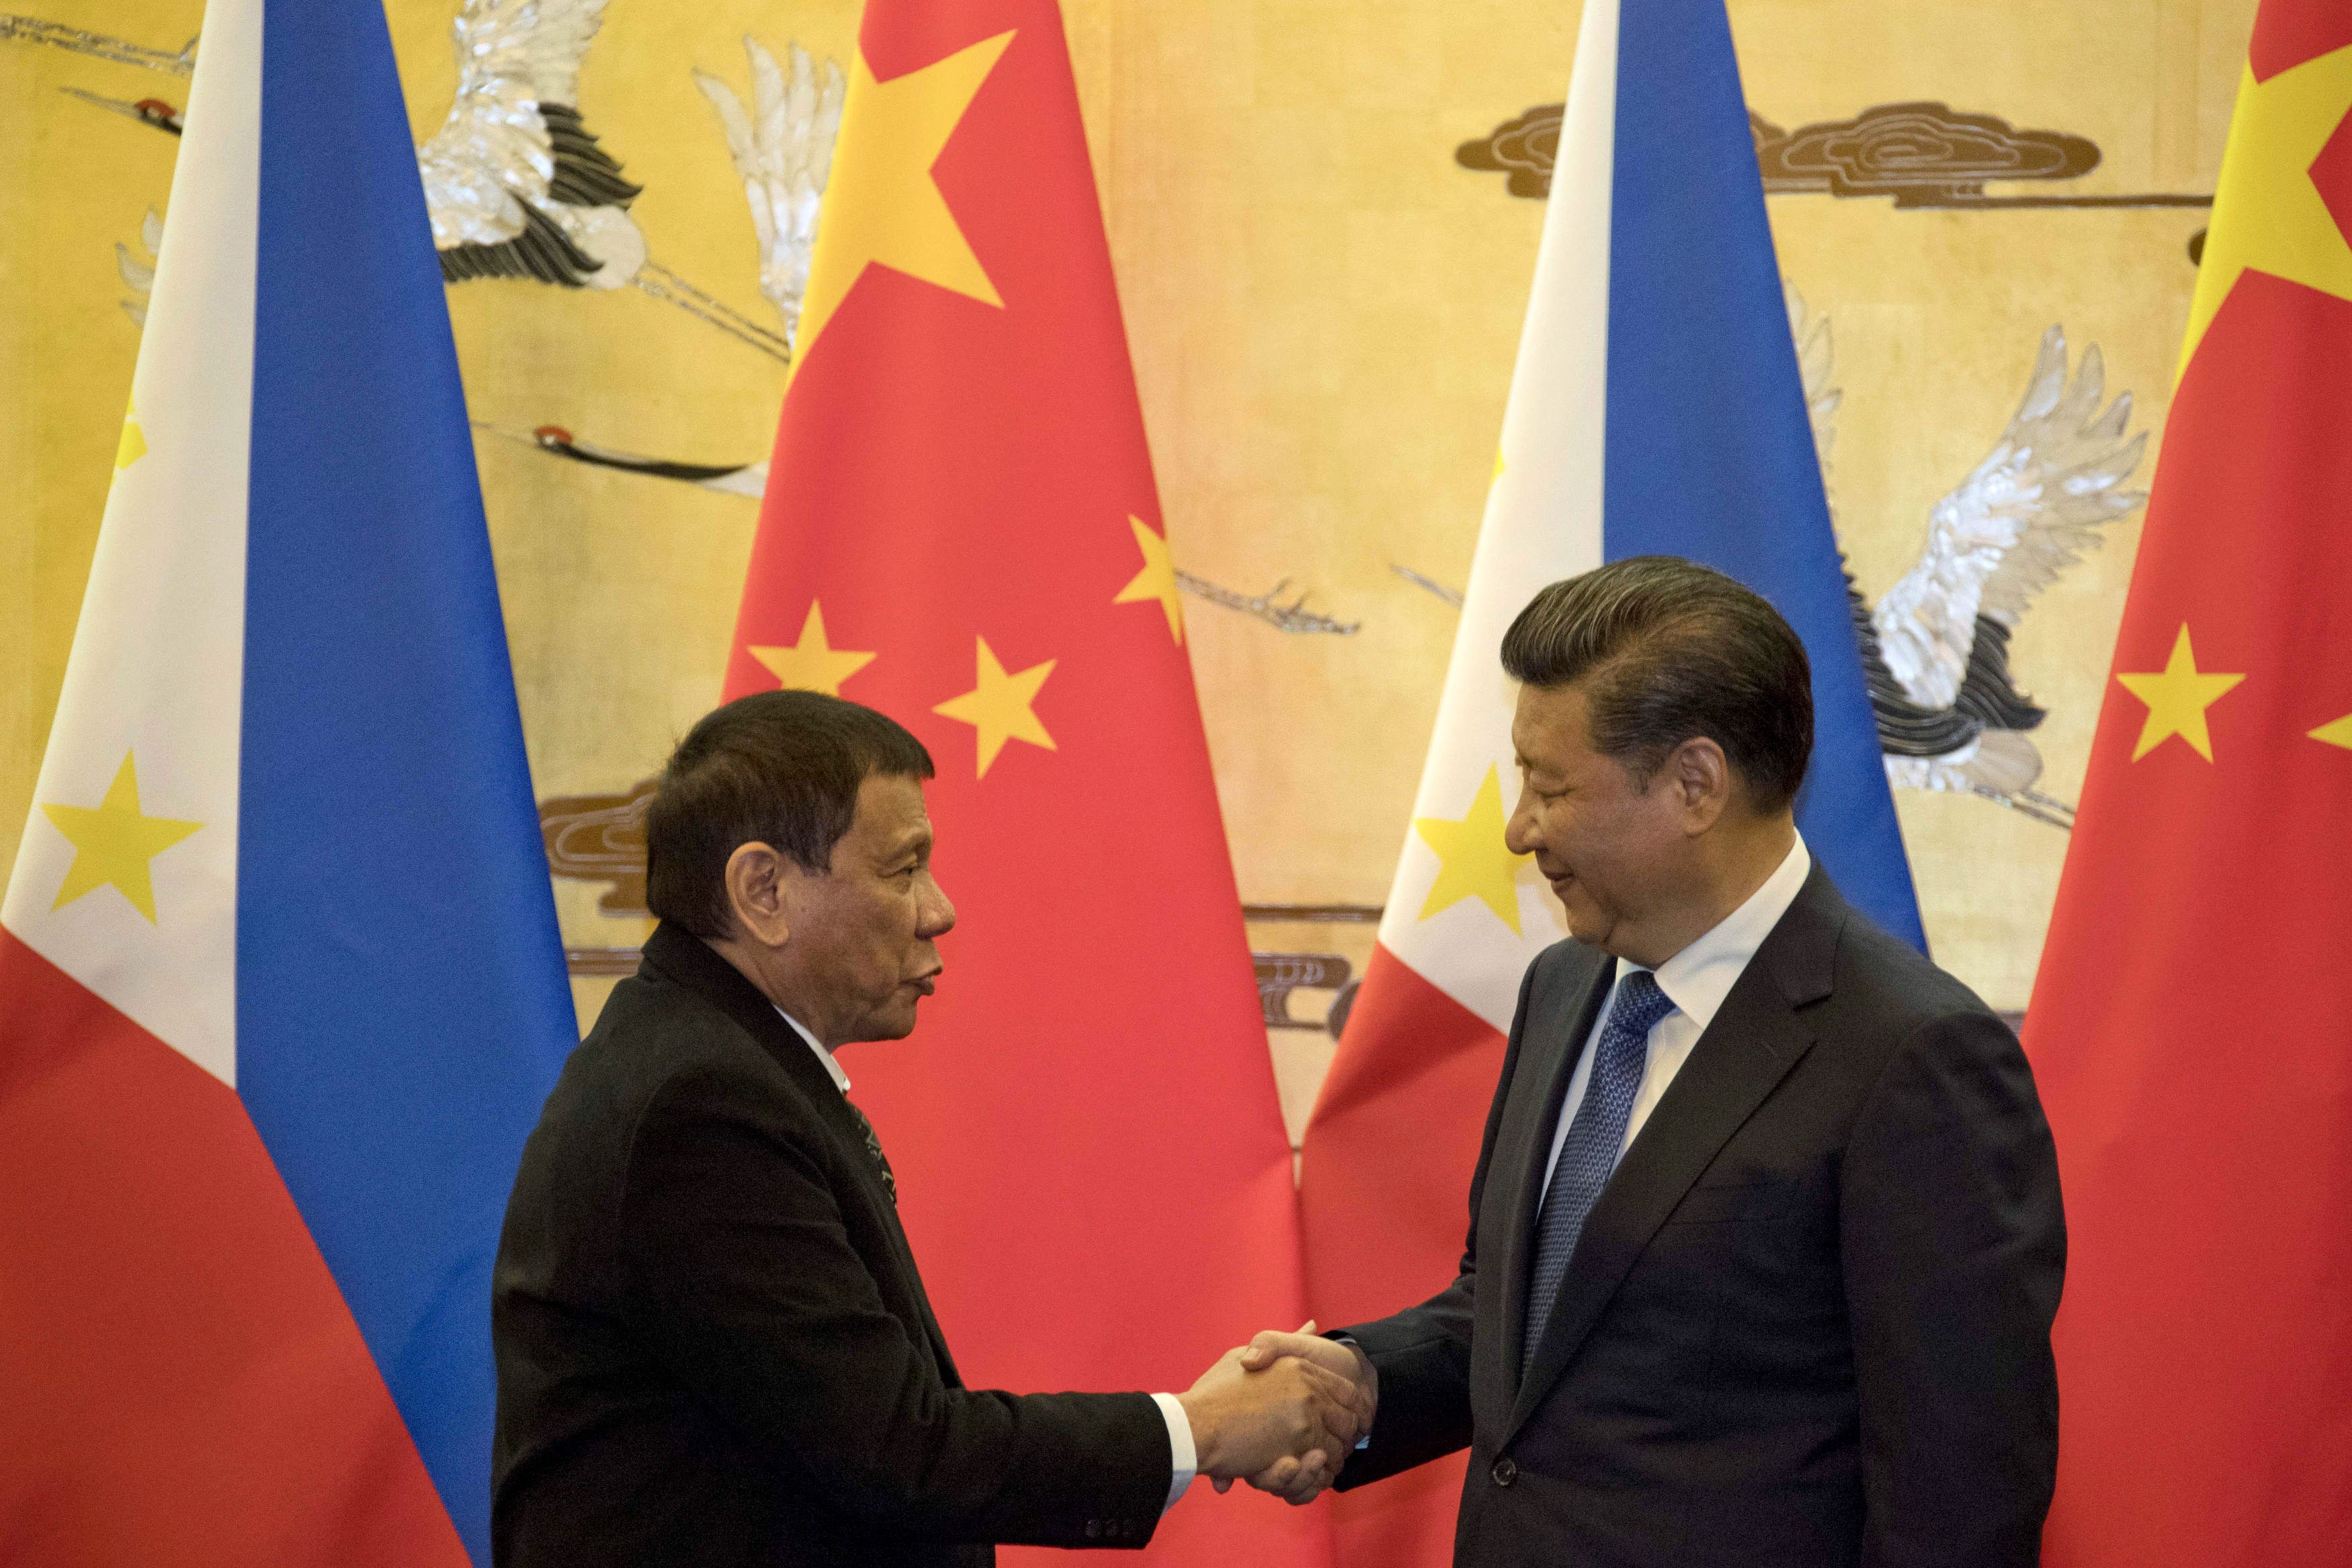 Philippine President Rodrigo Duterte (left) and Chinese President Xi Jinping shake hands after a signing ceremony in Beijing on October 20, 2016. Since taking office in 2016, Duterte has championed an “independent foreign policy” that has distanced the country from its traditional ally, the US. Photo: AFP